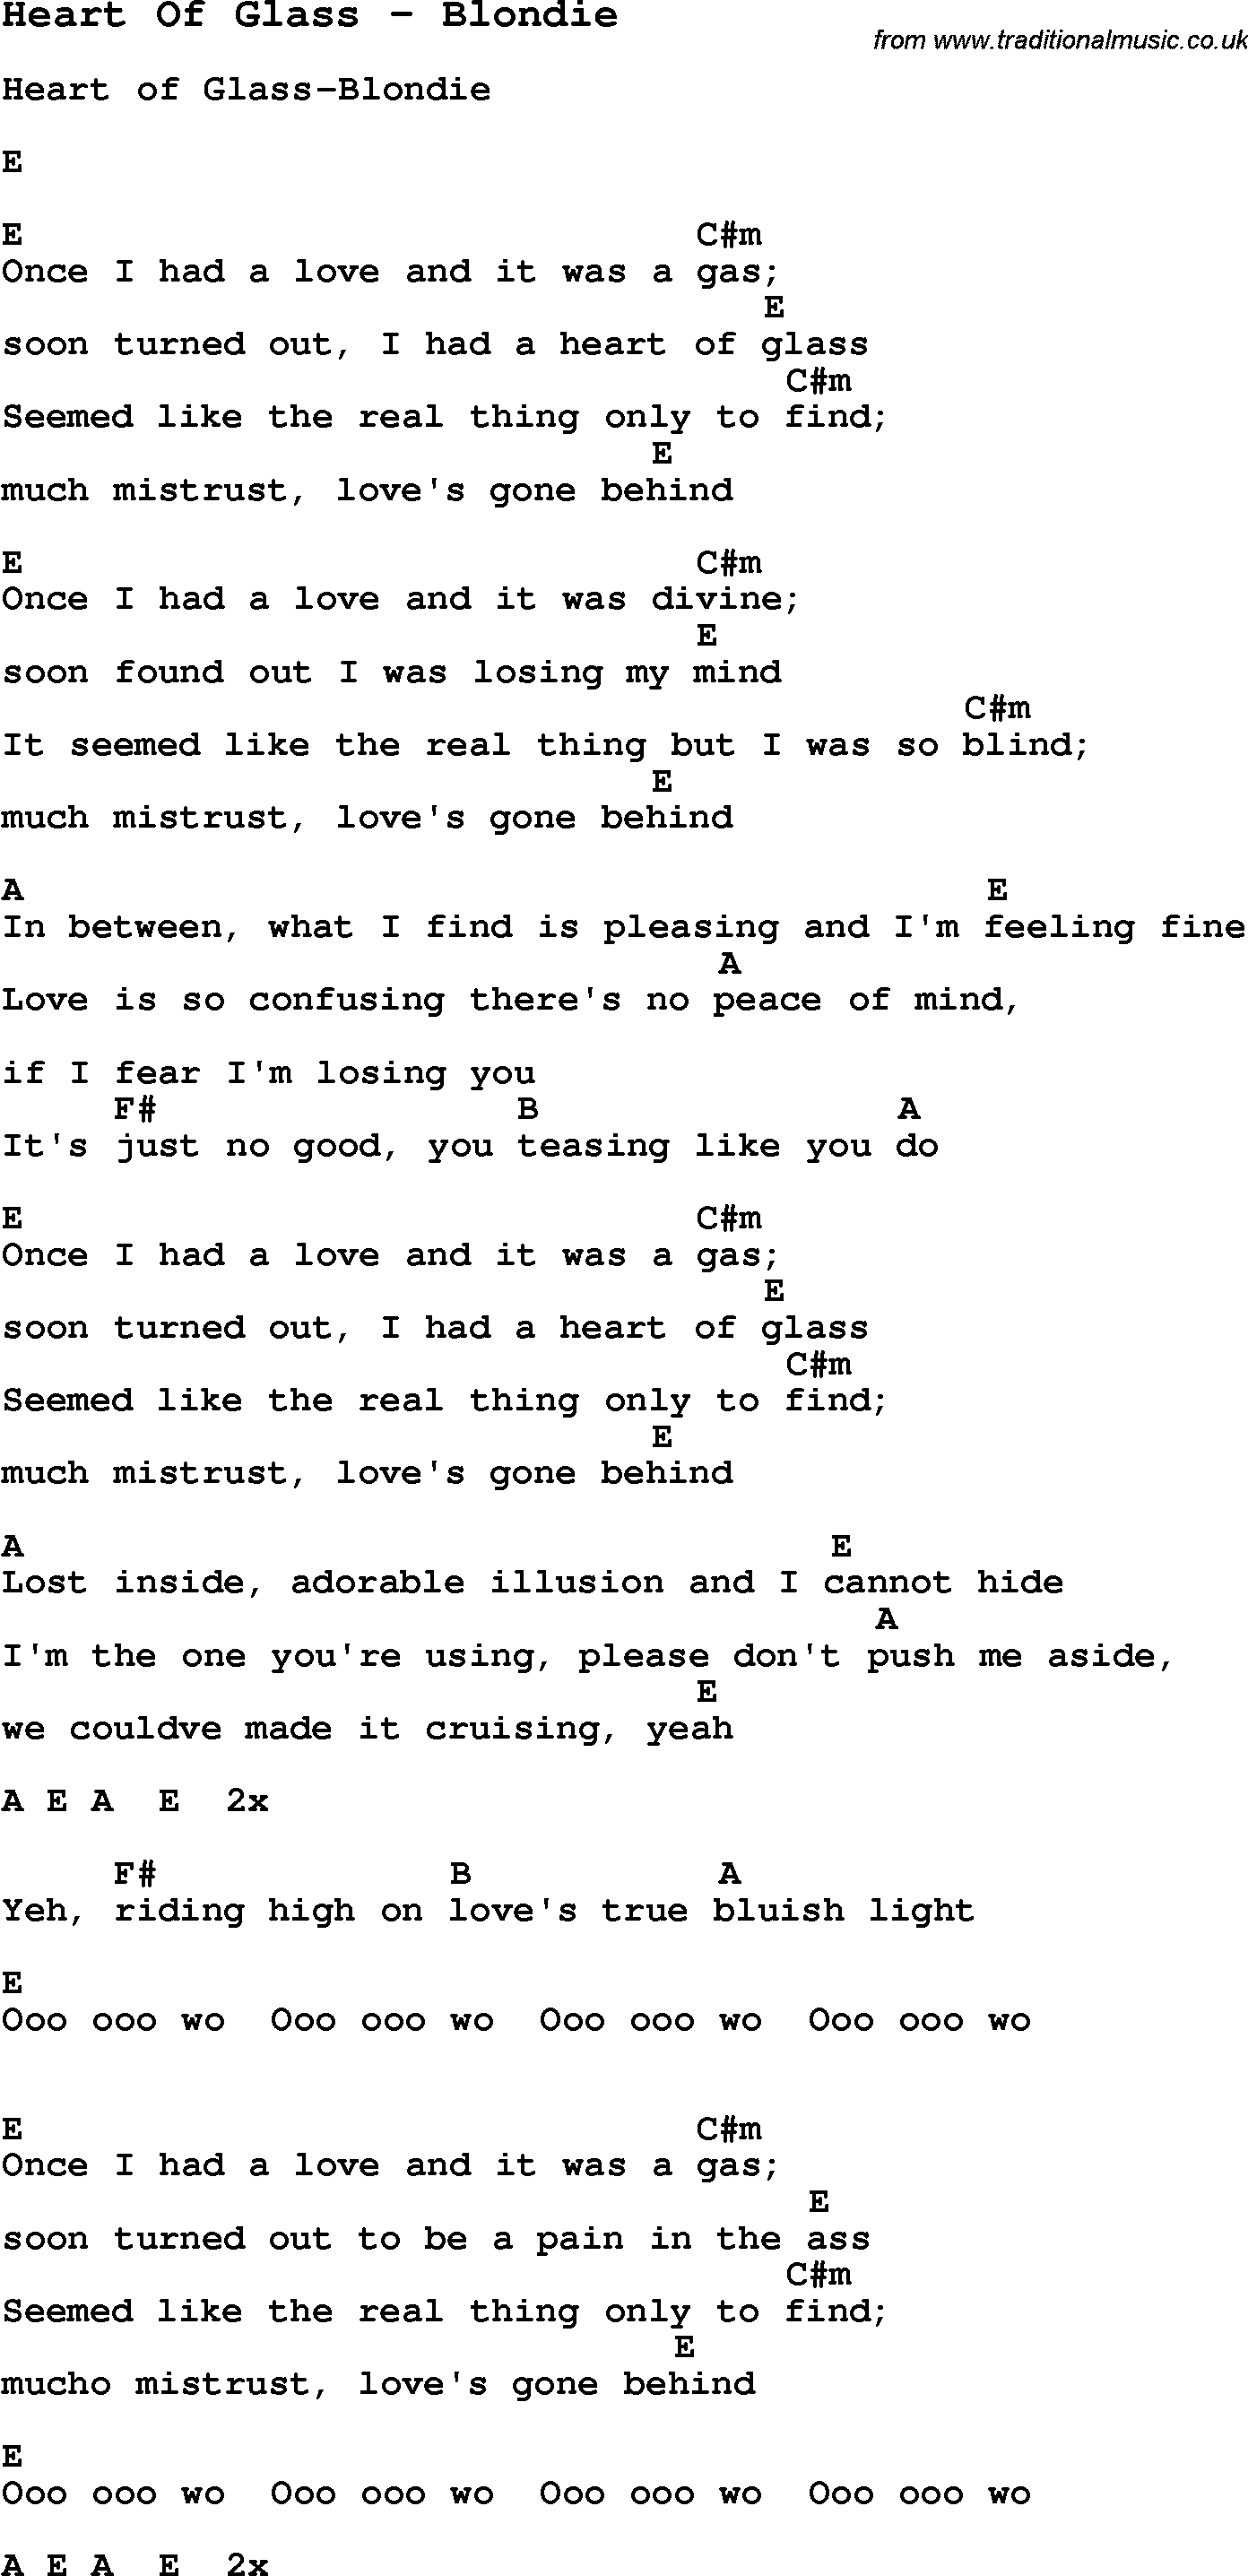 Song Heart Of Glass by Blondie, with lyrics for vocal performance and accompaniment chords for Ukulele, Guitar Banjo etc.